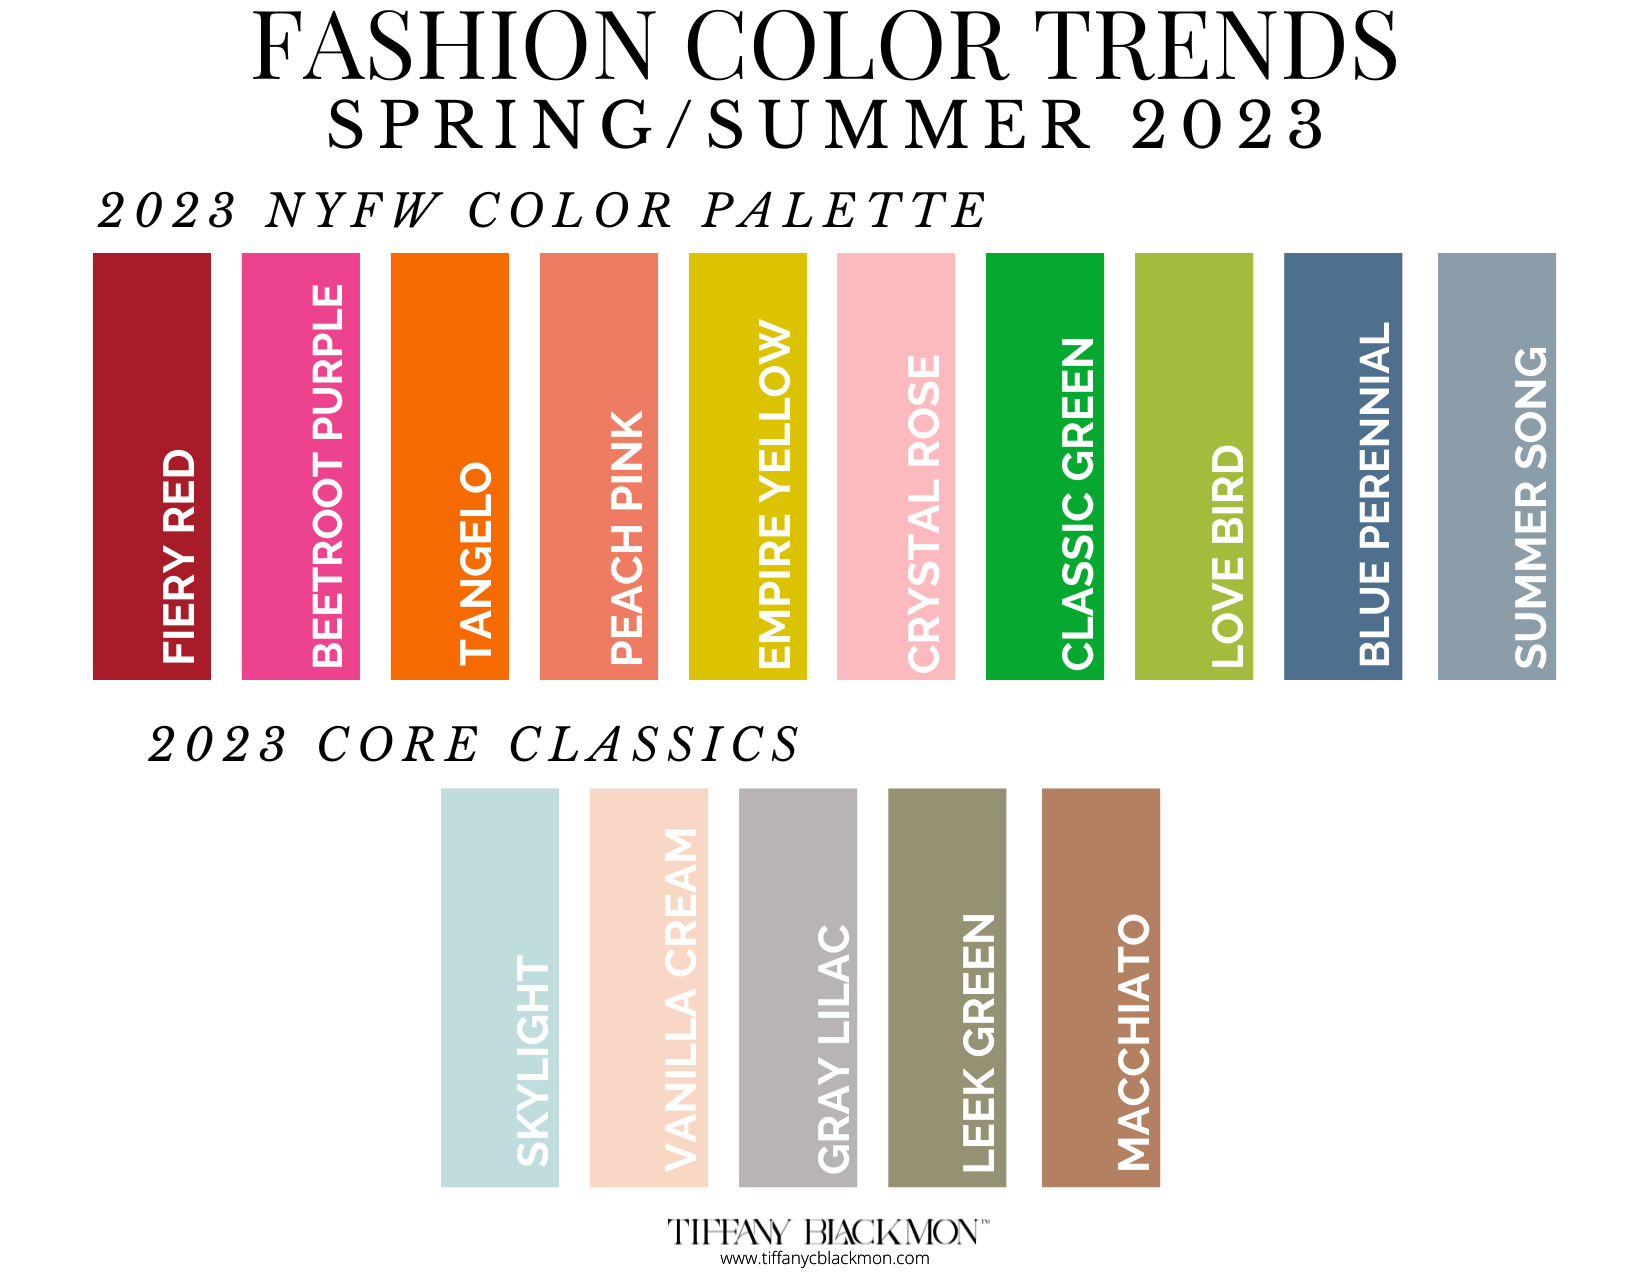 Fashion Colors of Spring/Summer 2023
#colorpalette #crystalrose #tangelo #classicgreen #blueperennial #skylight #vanillacream #graylilac #leekgreen #macchiato #colors #springfashion #summerfashion #outfits #style